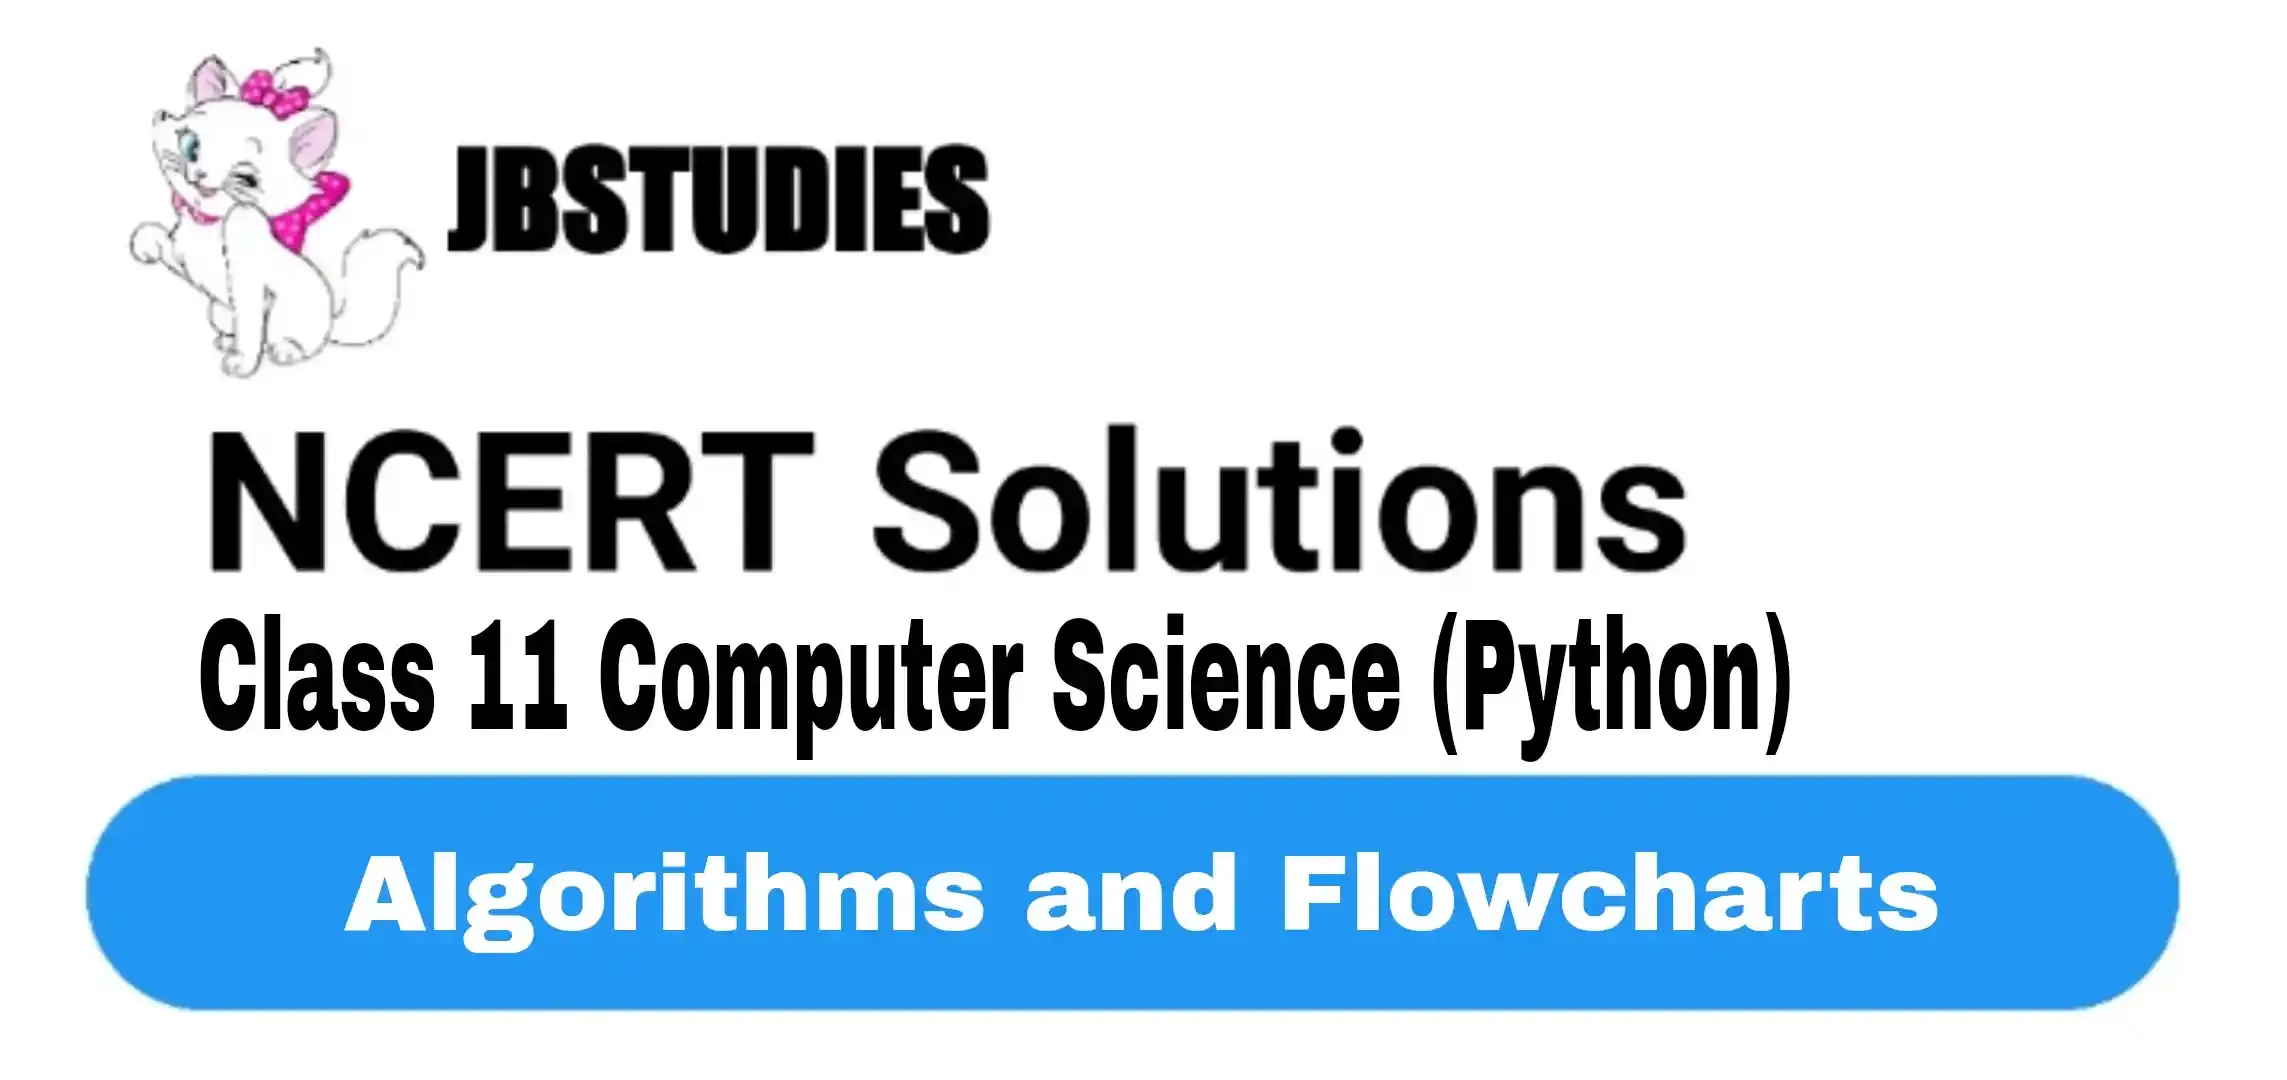 Solutions Class 11 Computer Science (Python) Chapter-6 (Algorithms and Flowcharts)